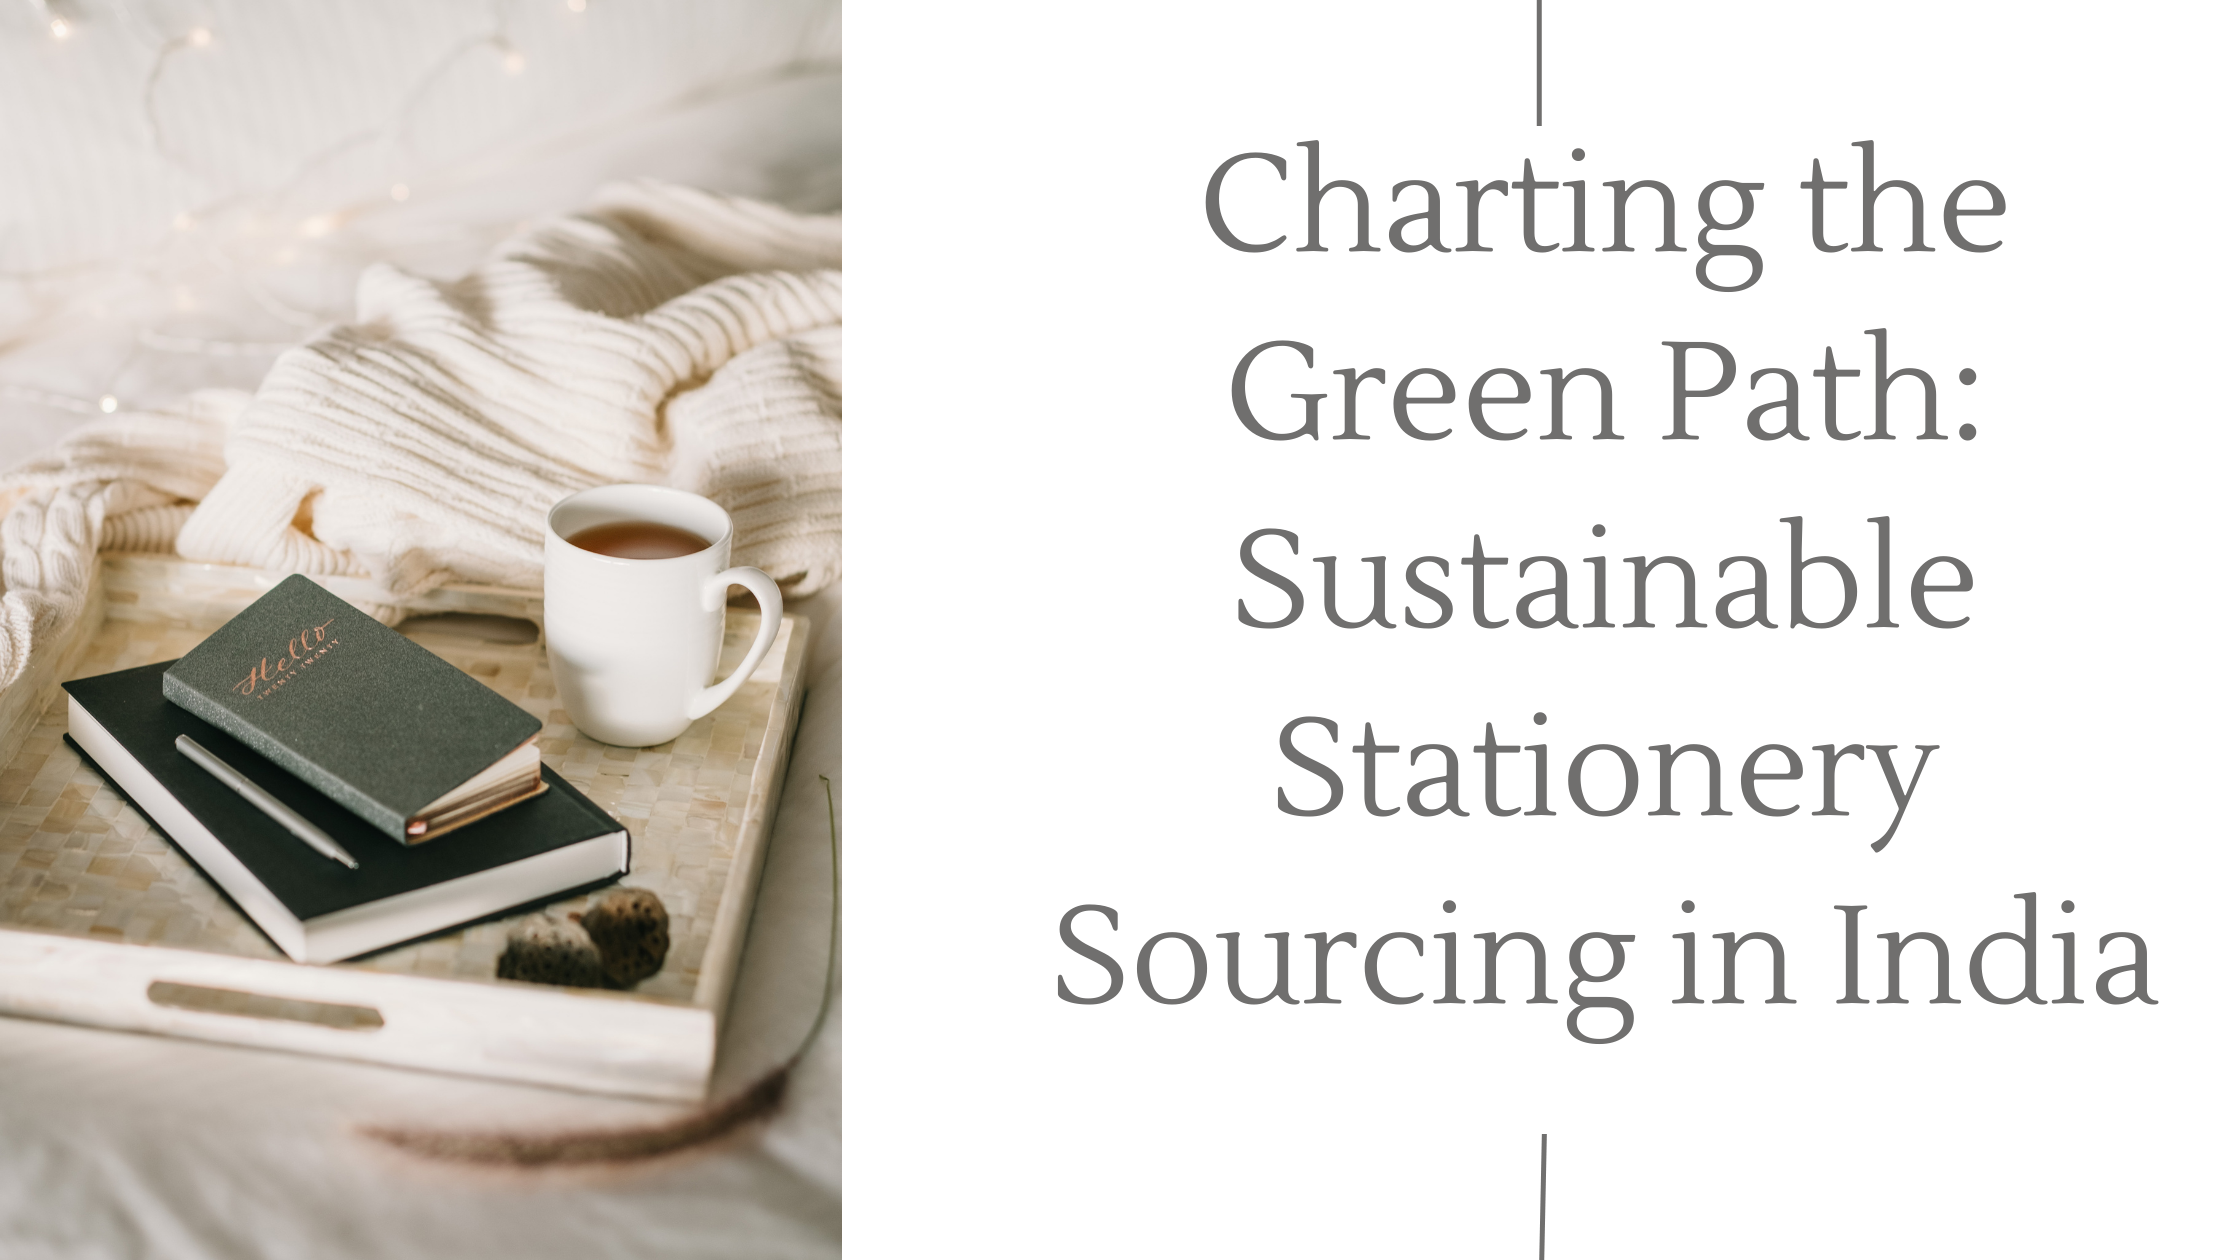 Charting the Green Path: Sustainable Stationery Sourcing in India